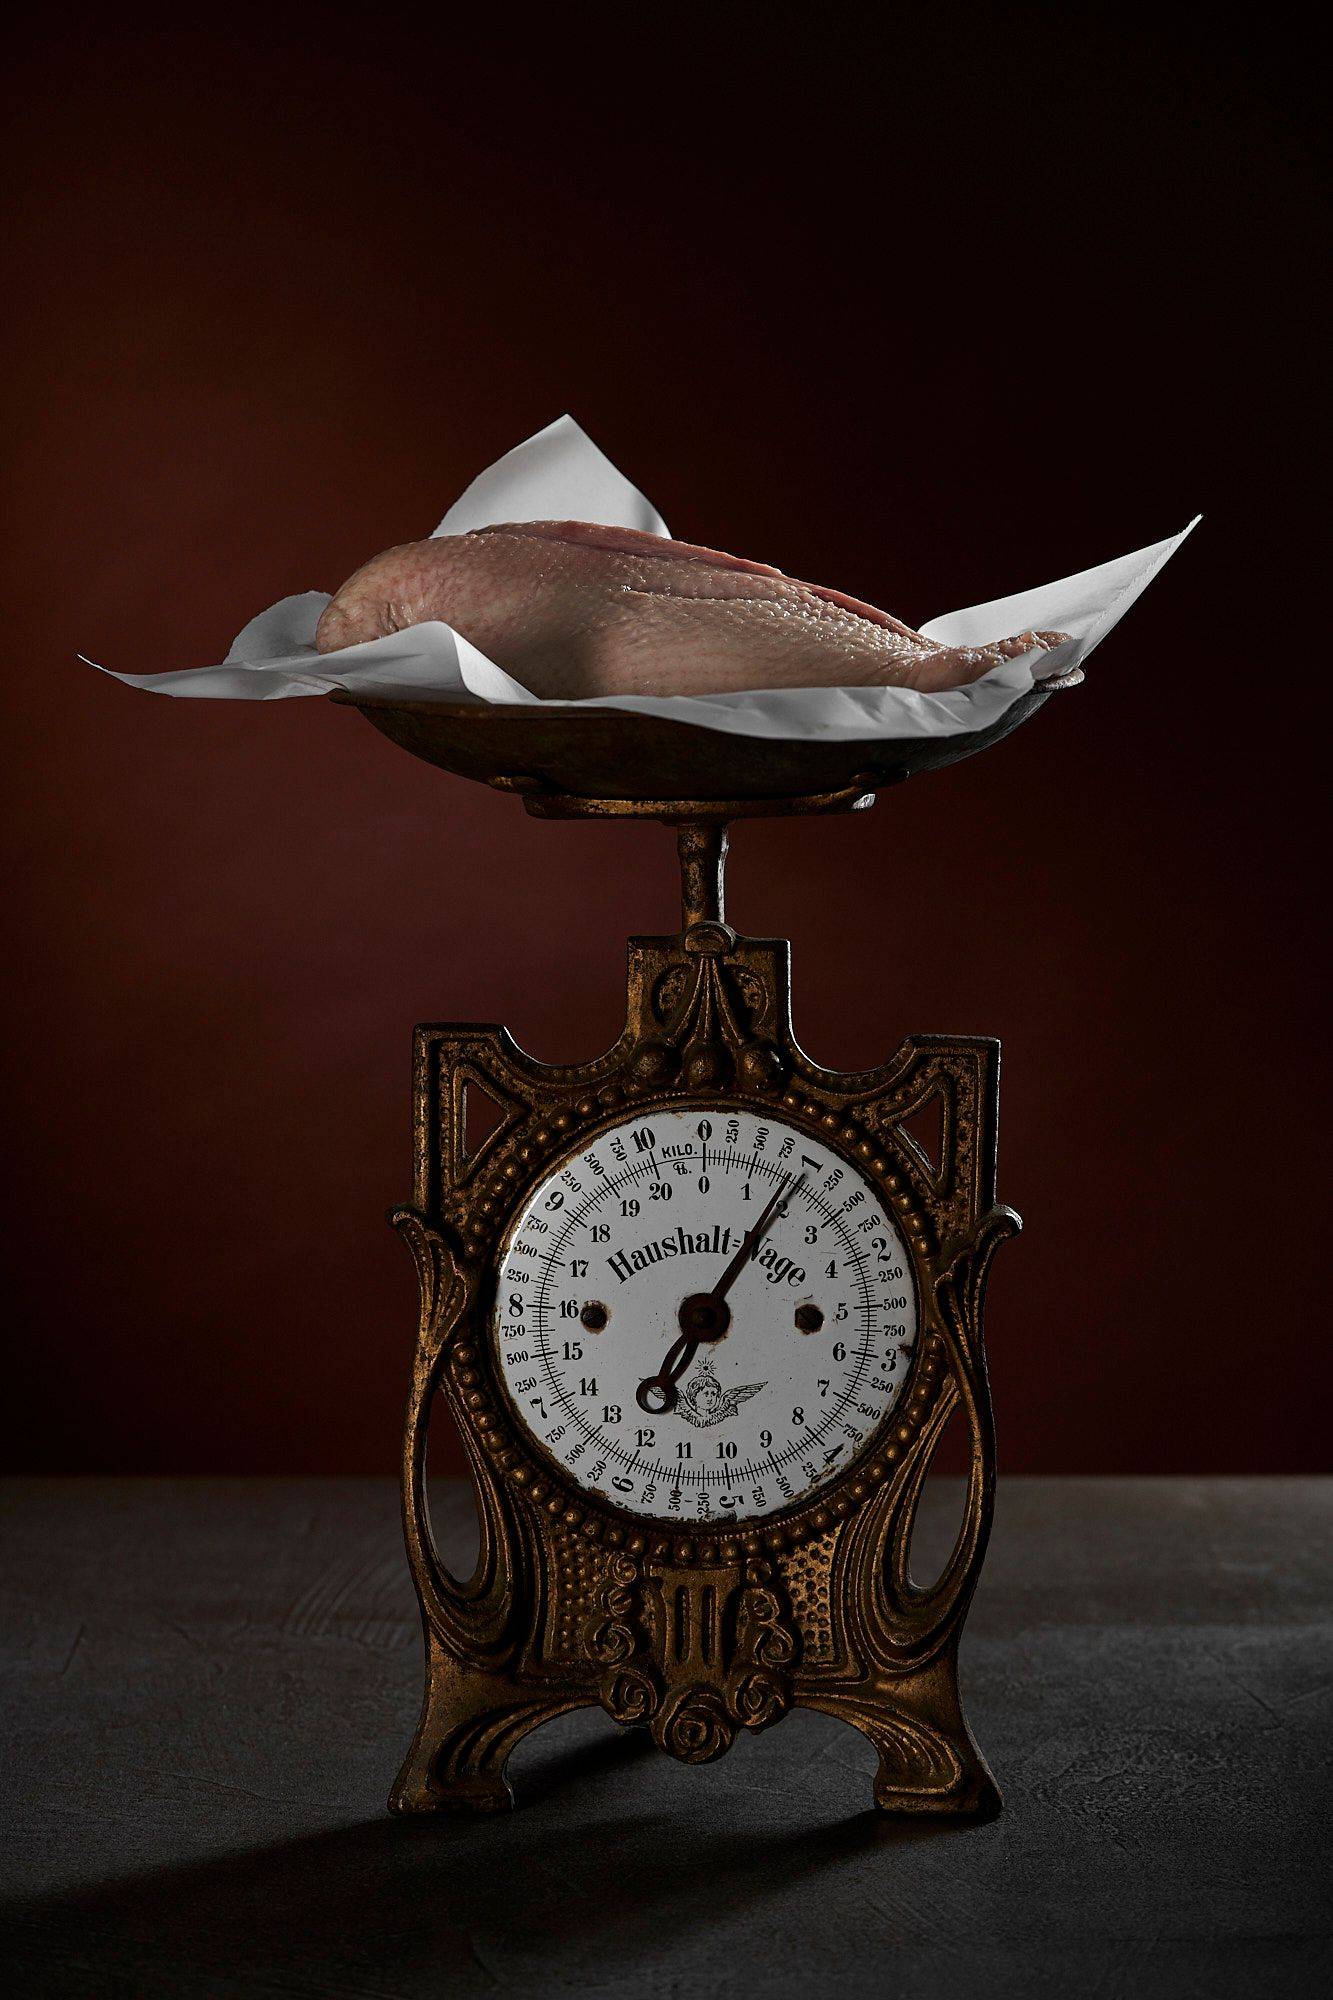 goose breast on vintage scale with brown background